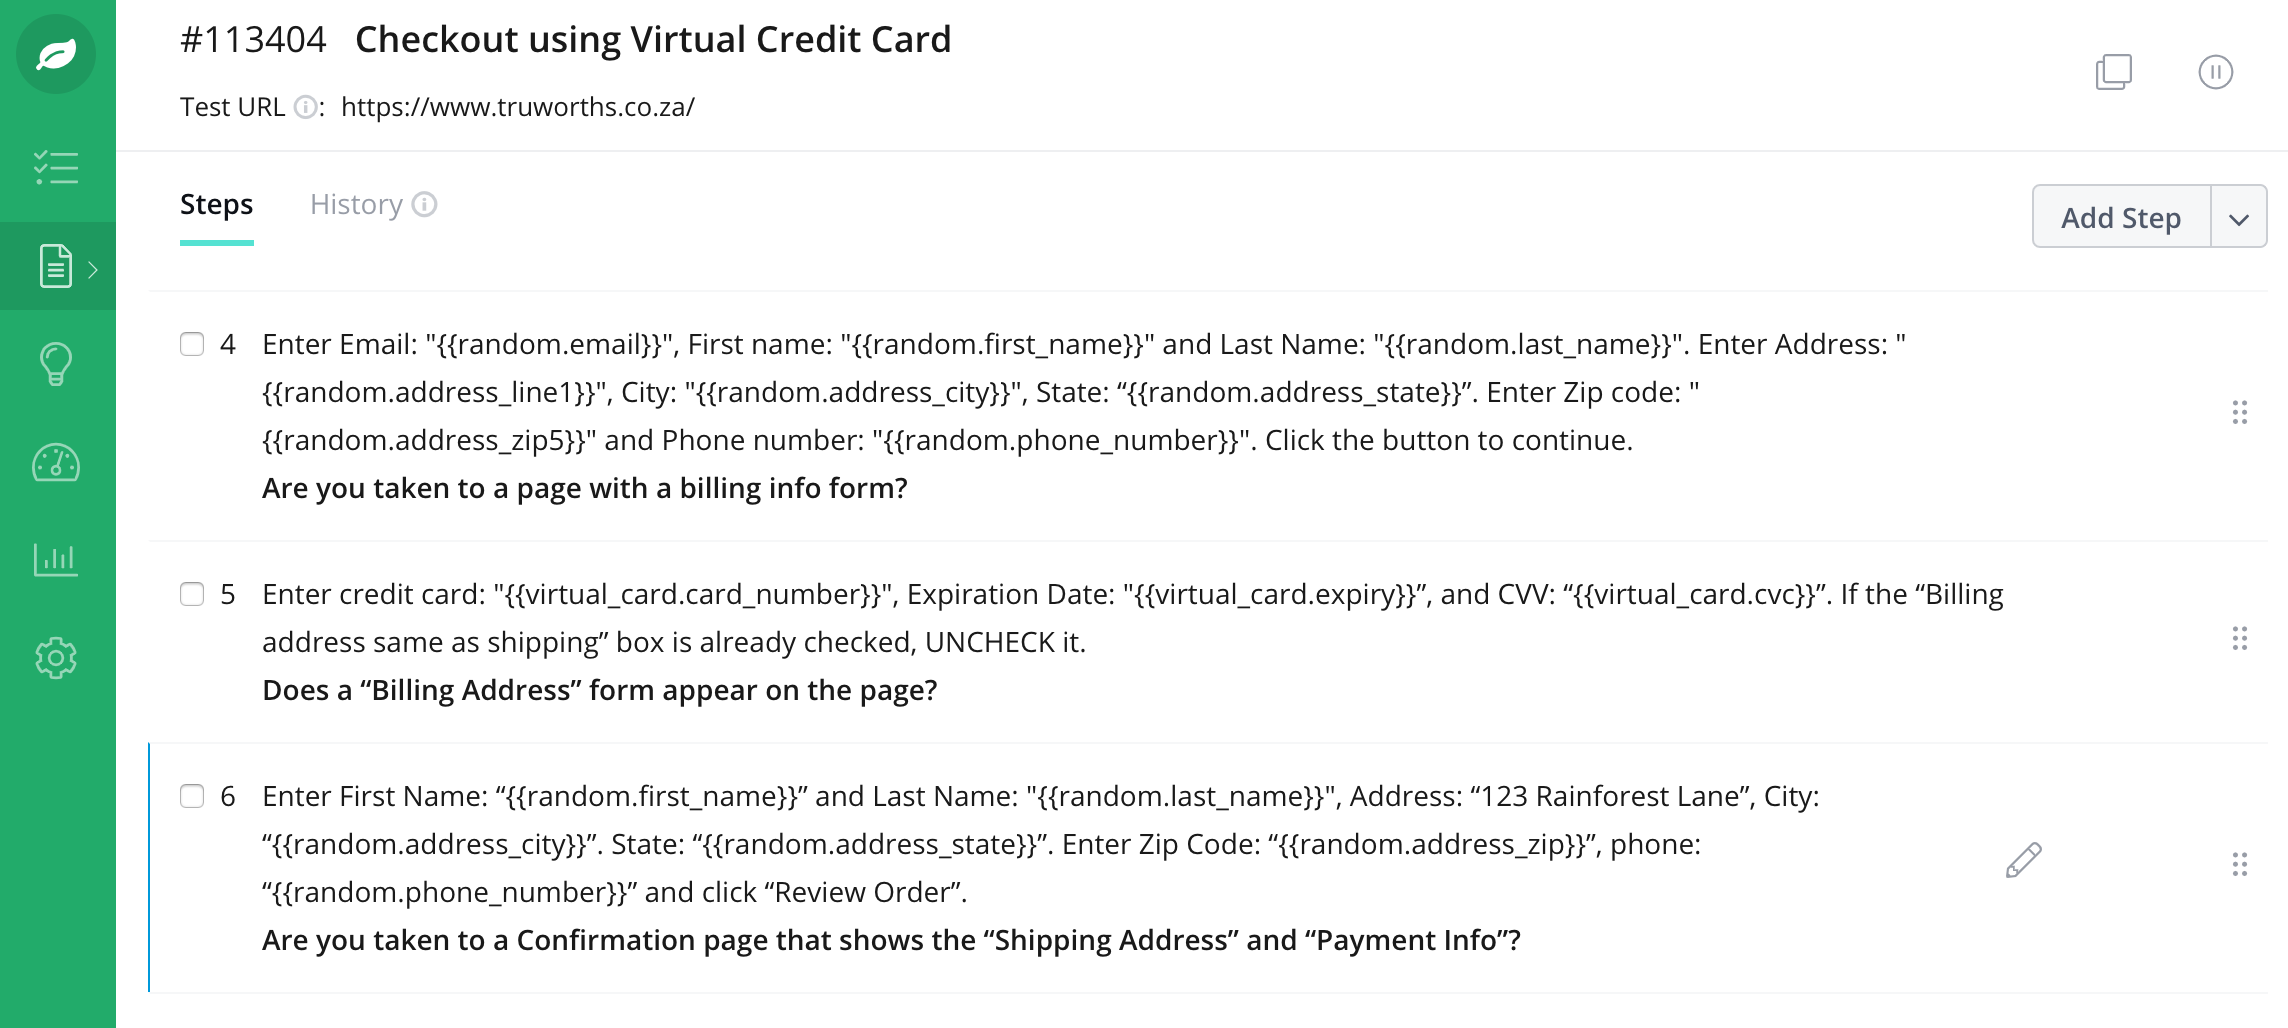 A test using virtual credit card numbers.